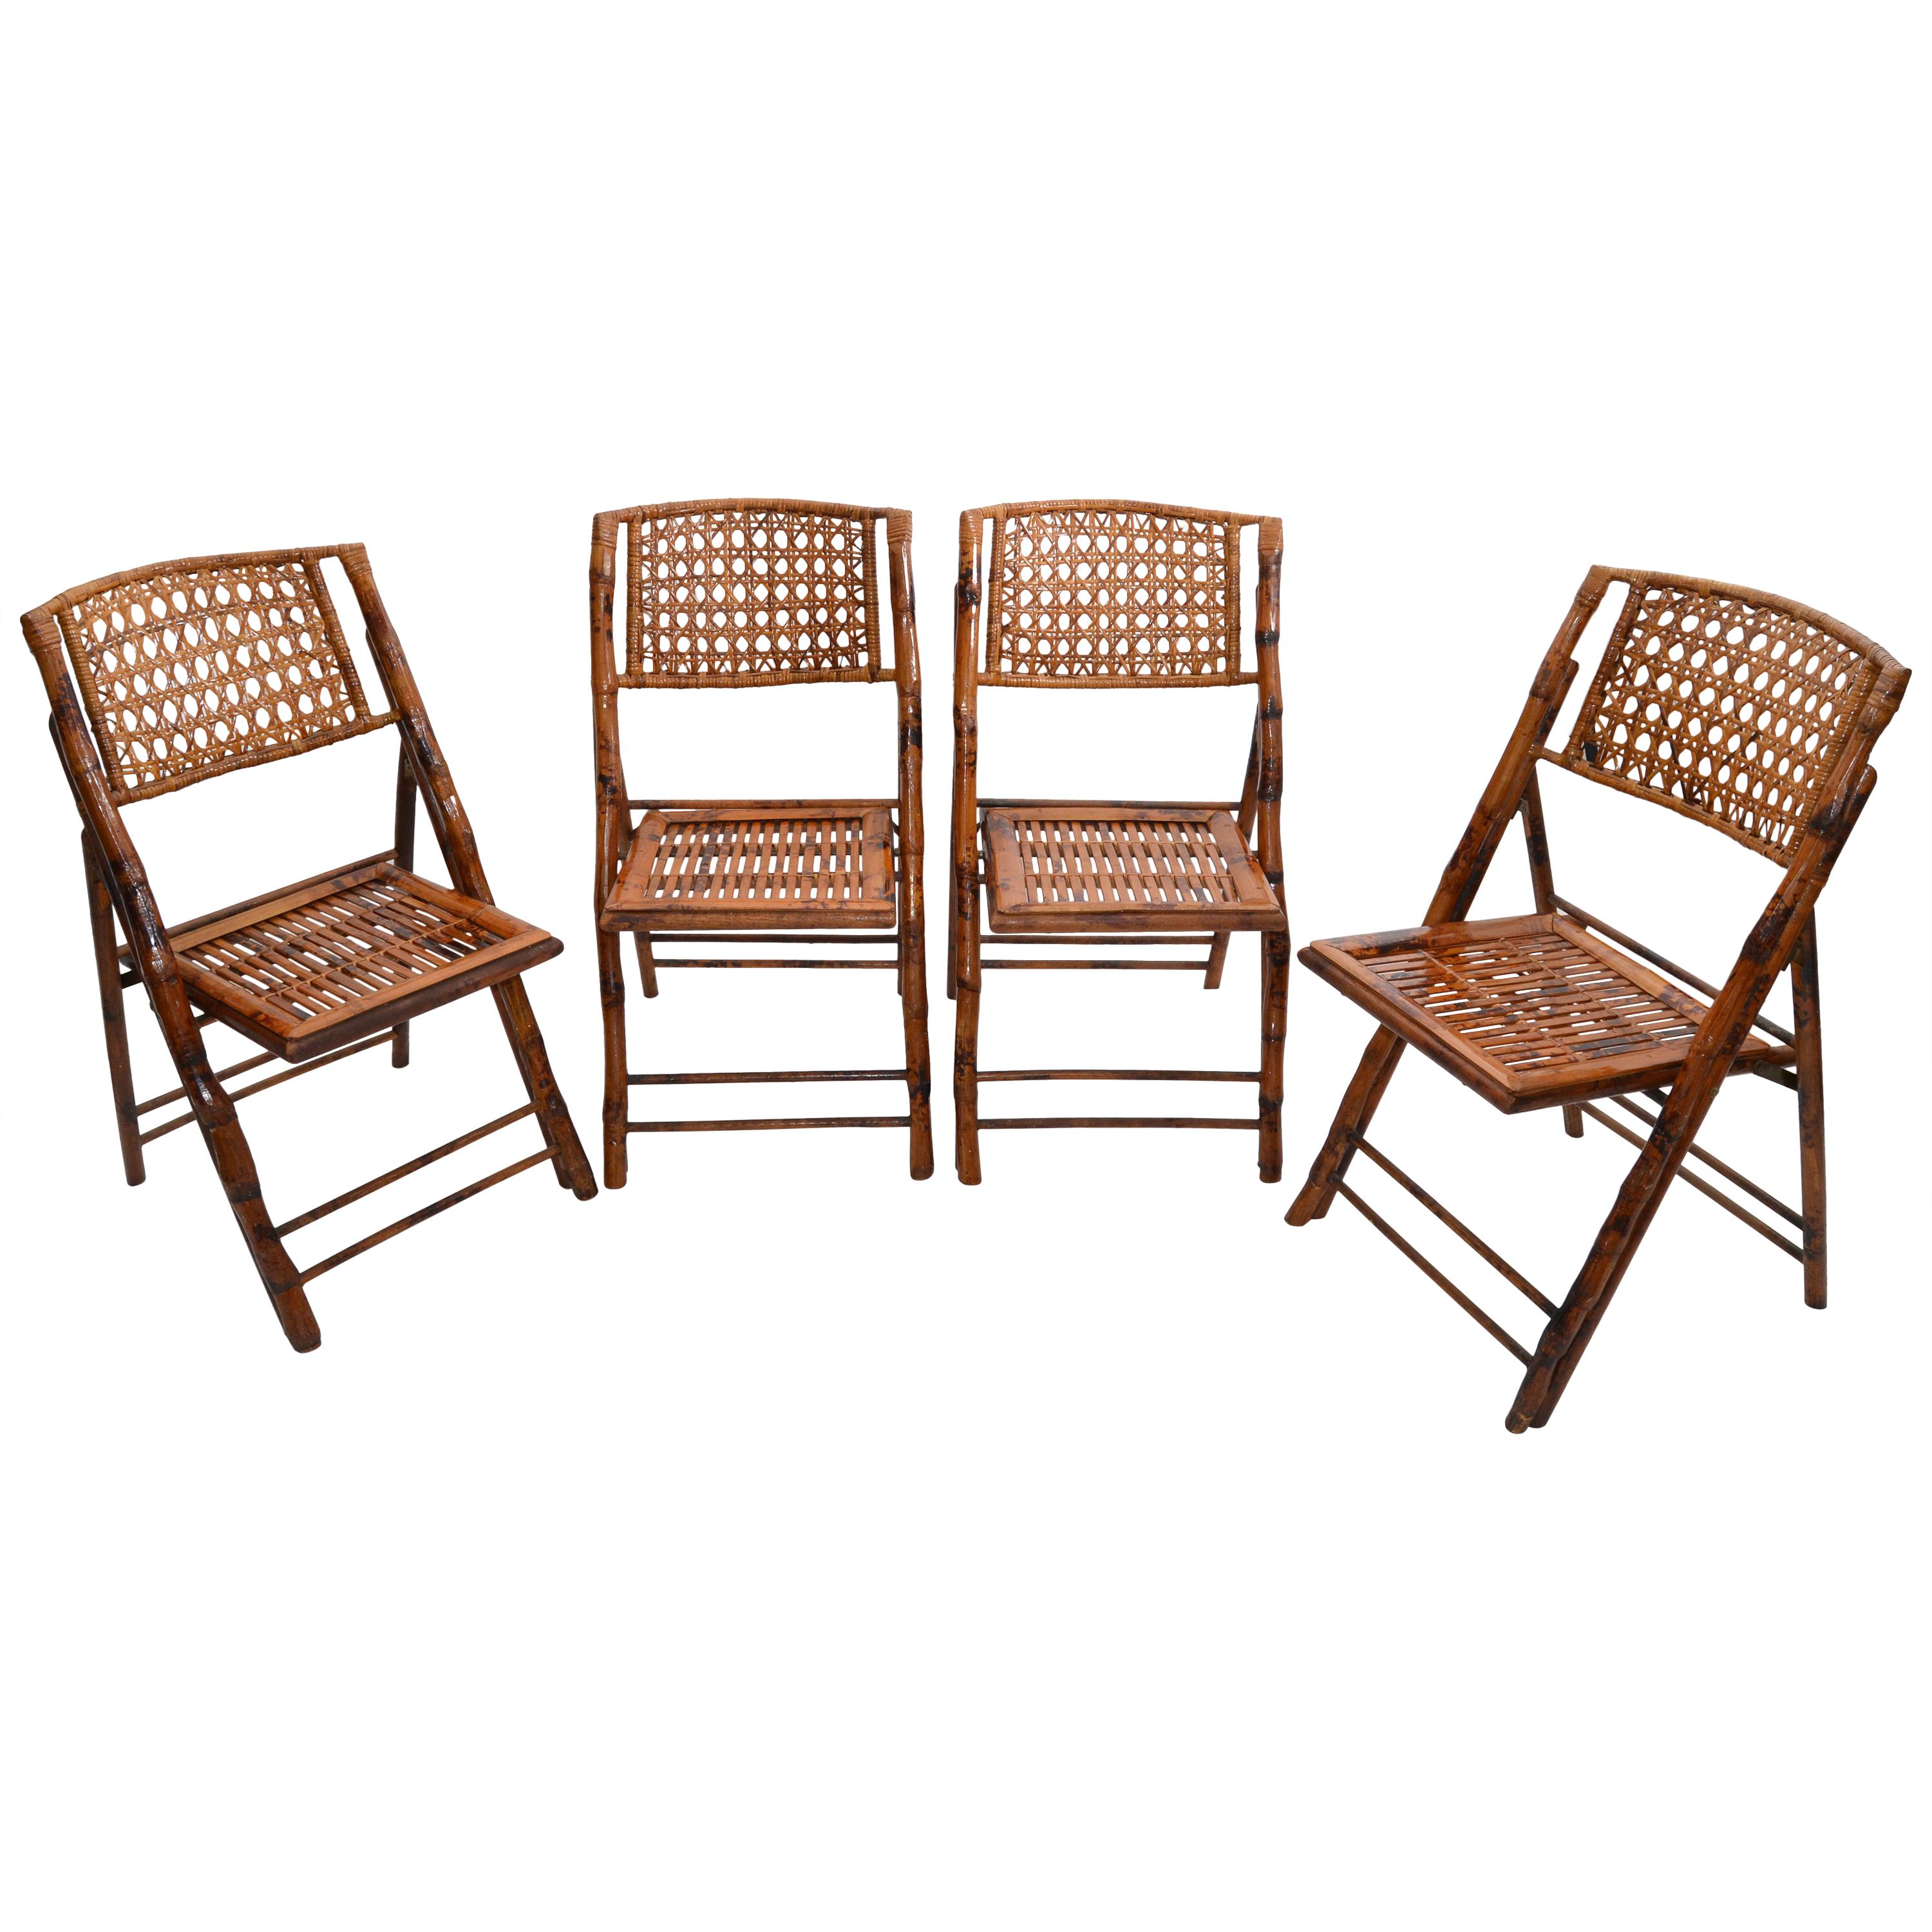 Boho Chic Mid-Century Modern Handcrafted Bamboo & Cane Folding Bistro Chairs, 4